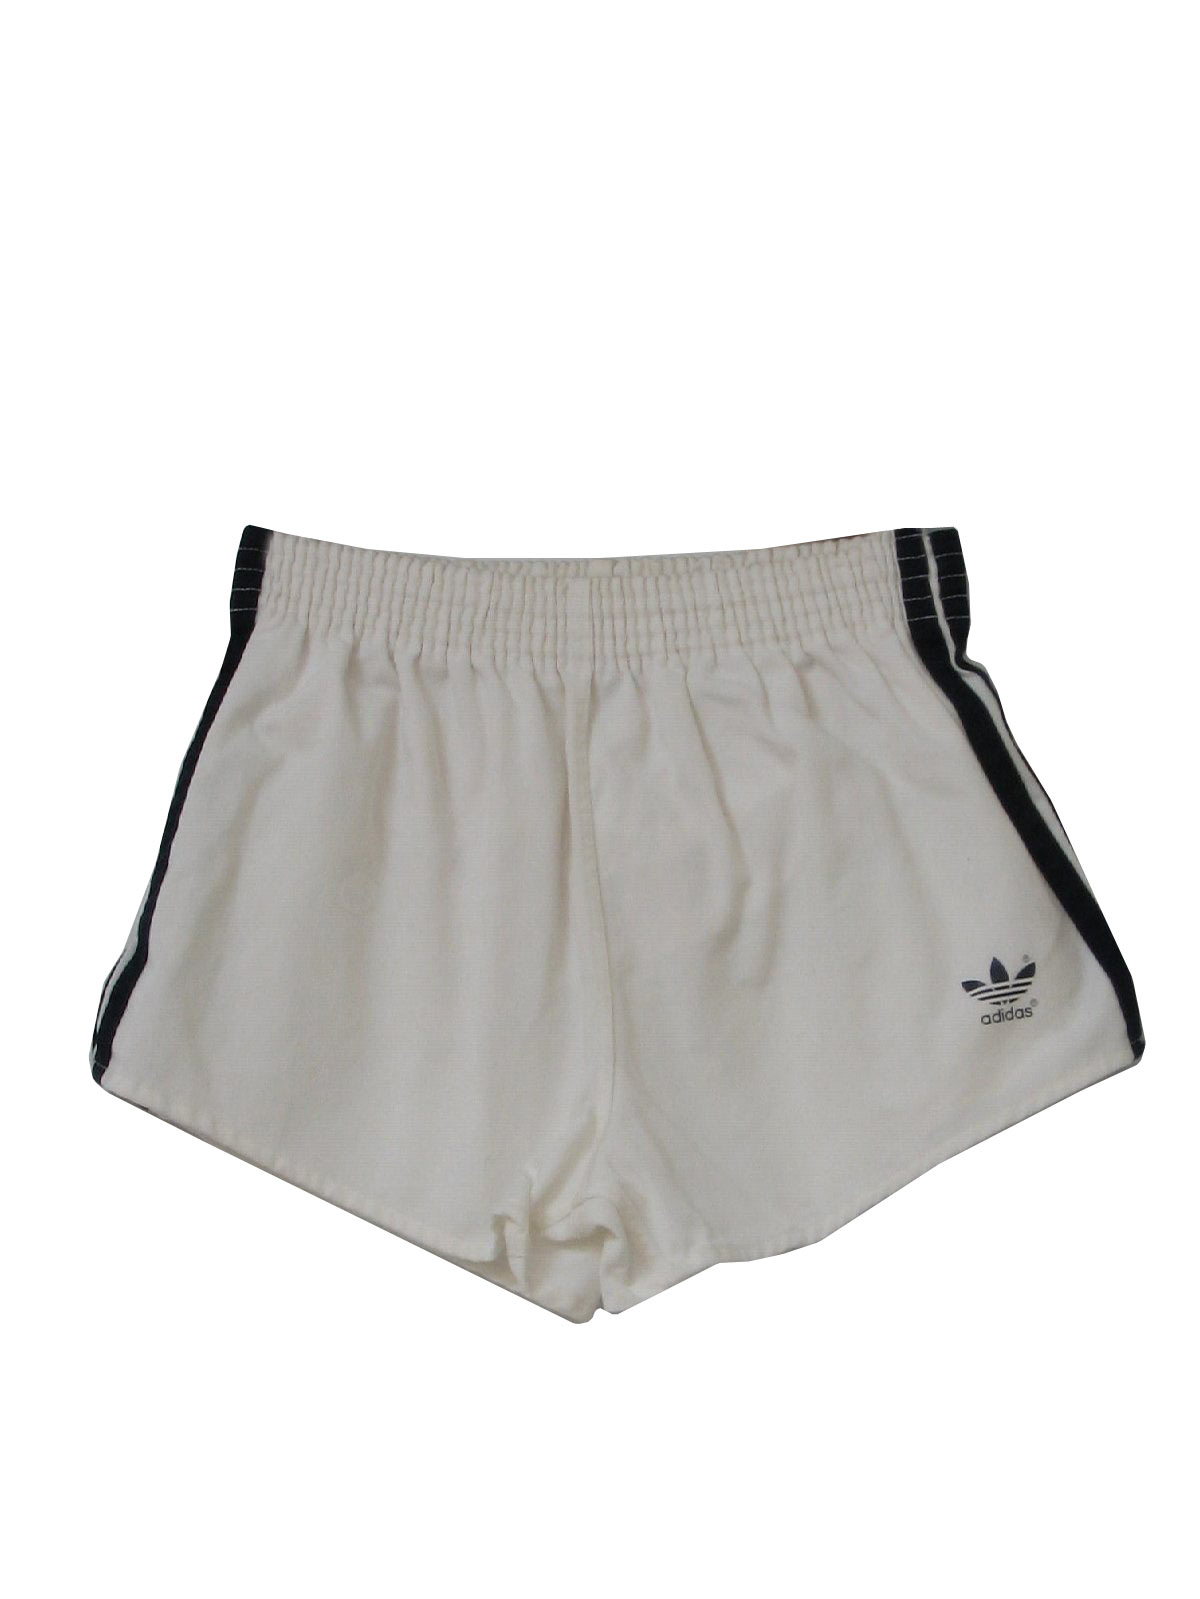 1980's Shorts (Adidas made in west germany): 80s -Adidas made in ...